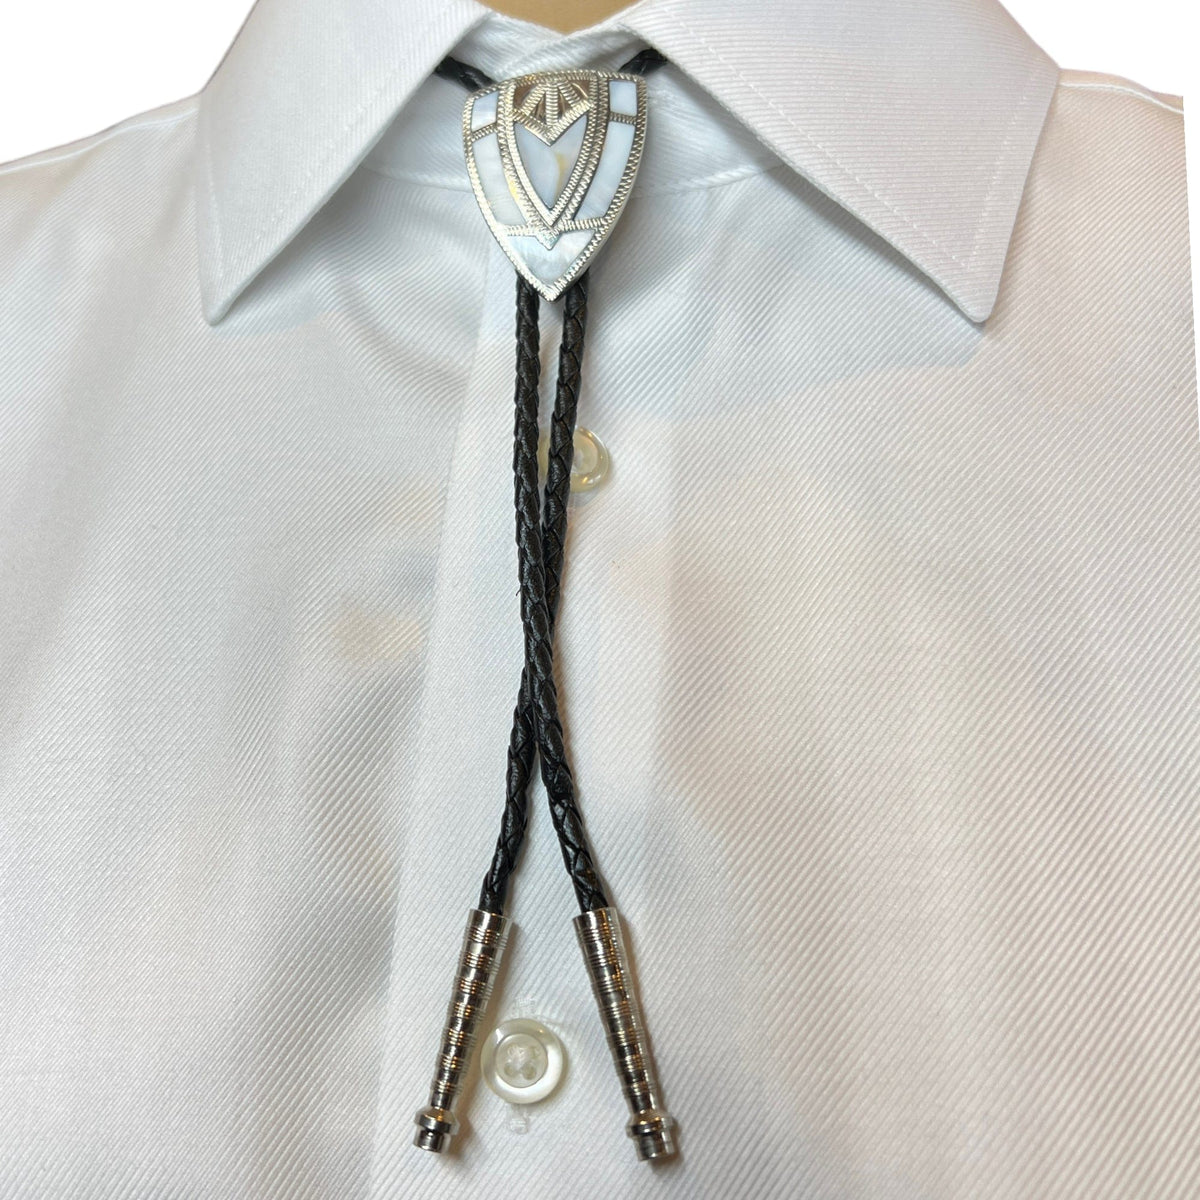 JH Vintage Unisex Mother of Pearl Shield Bolo Tie - Silver